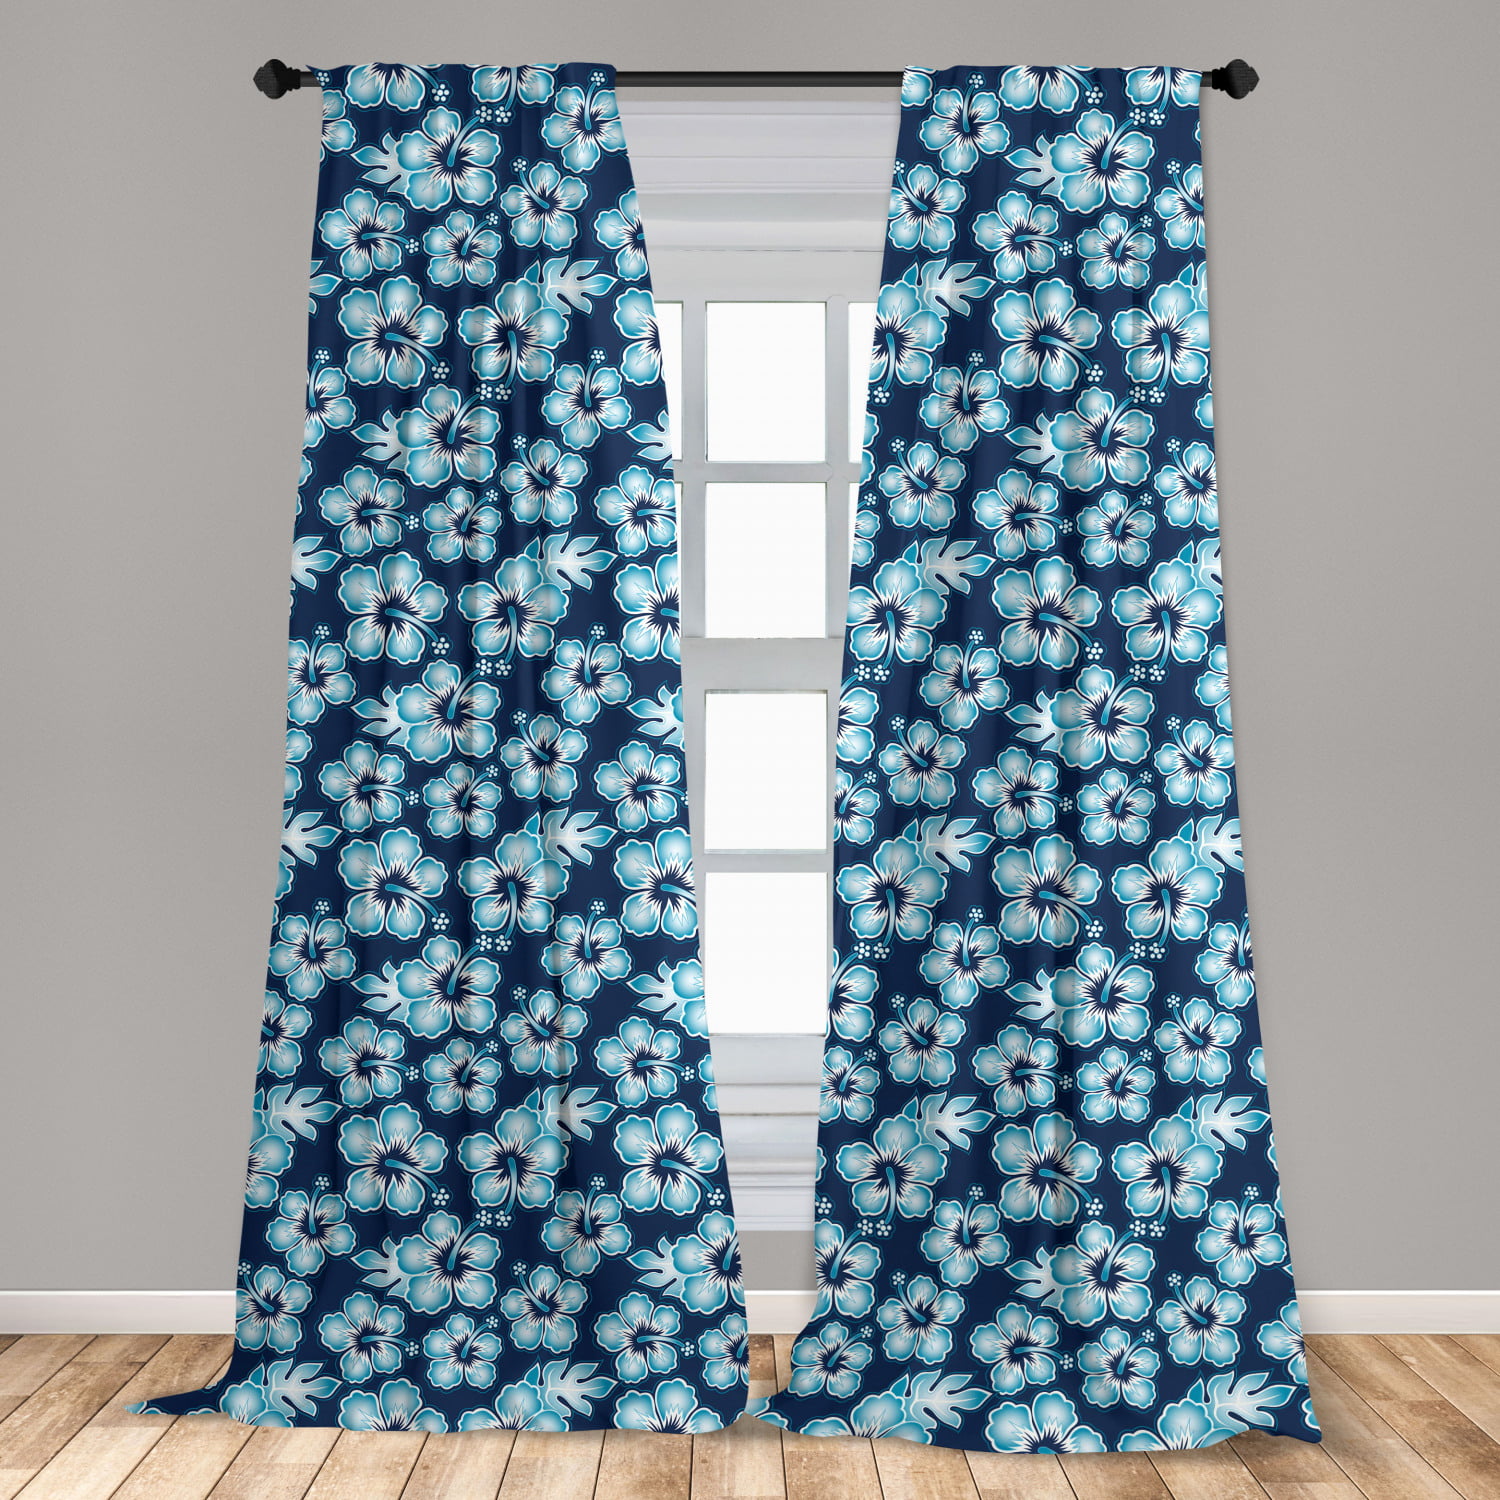 Dark Blue and Sky Blue Hibiscus Hawaiian Tropical Island Flowers Petals and Buds Leaves Art Print Decorative Bedding Scarf and a Pillow Sham for Hotels Homes Ambesonne Navy Bed Runner Set